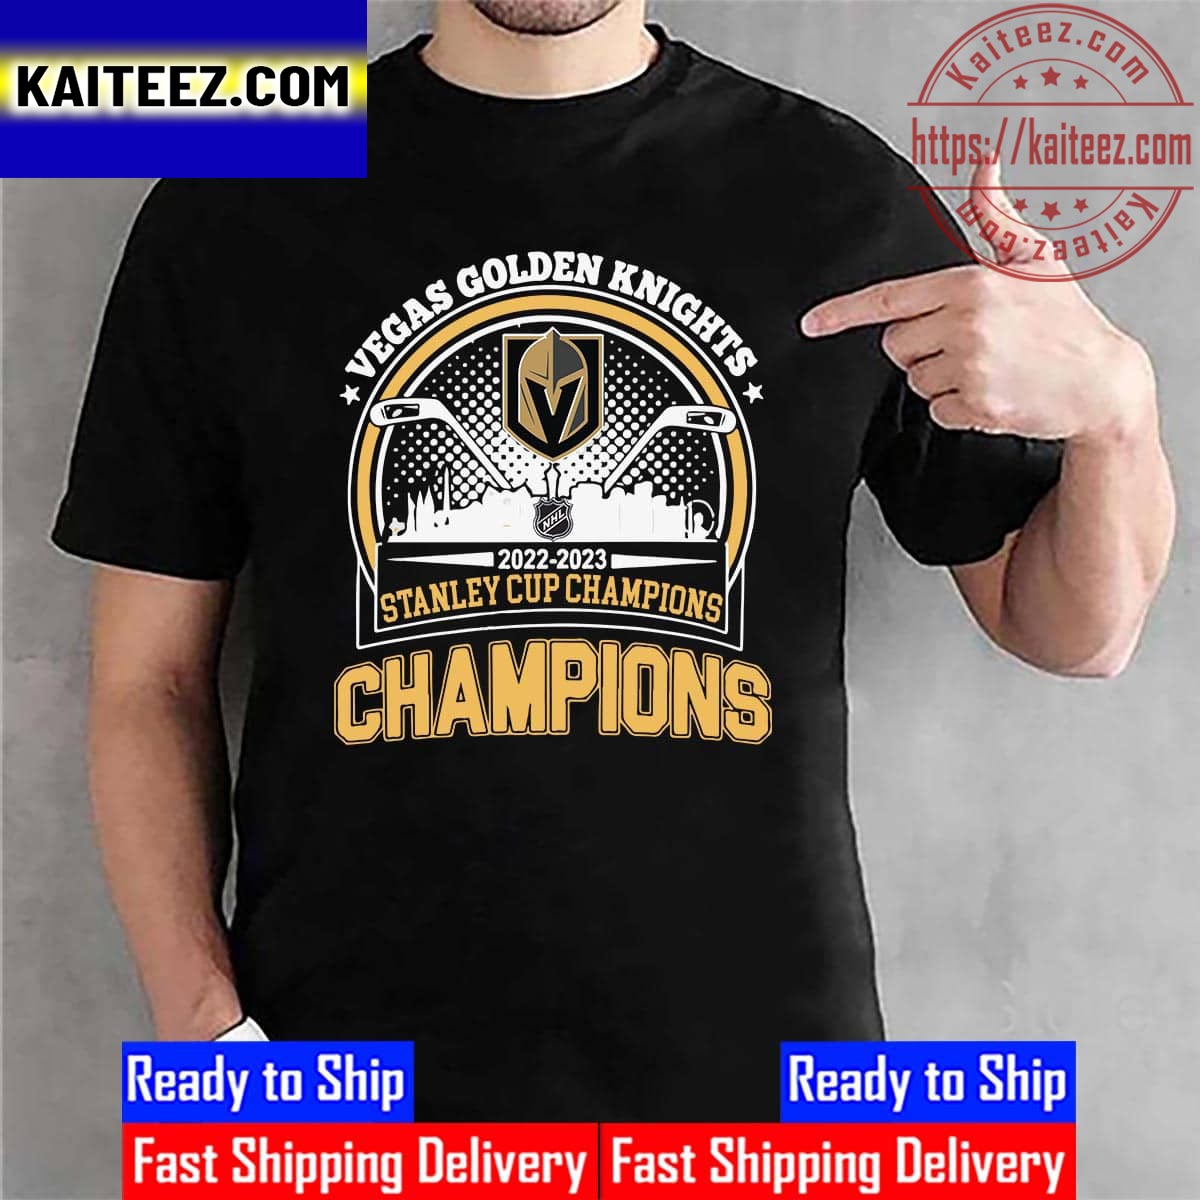 http://kaiteez.com/wp-content/uploads/2023/06/2022-2023-Stanley-Cup-Champions-Are-Vegas-Golden-Knights-Champions-Vintage-T-Shirt.jpg